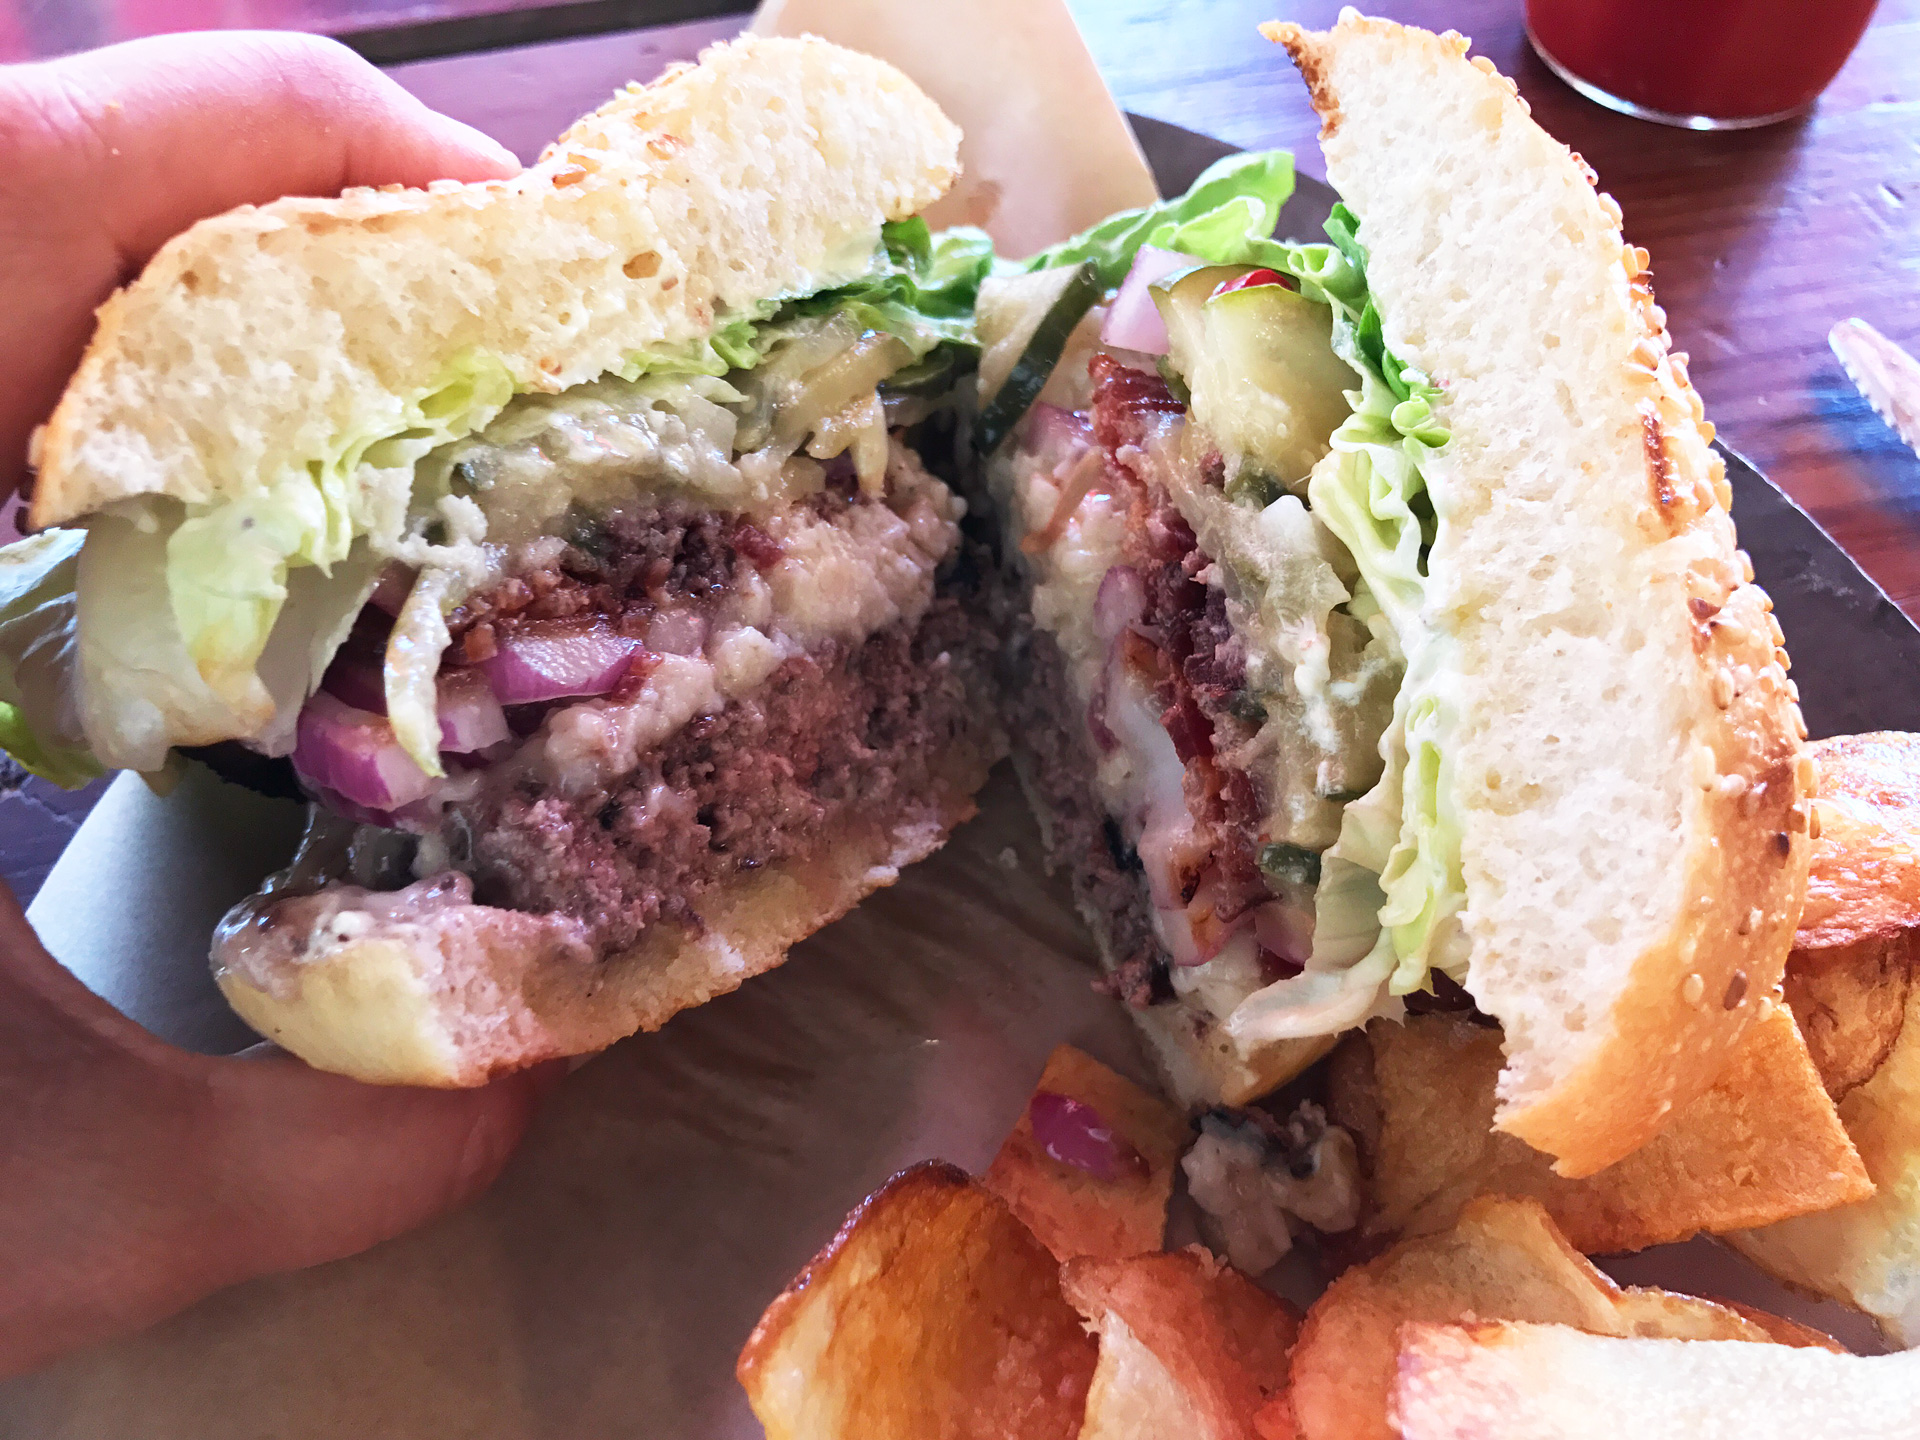 The grass-fed burger at The Cook and Her Farmer in Swan’s Market in Old Oakland.